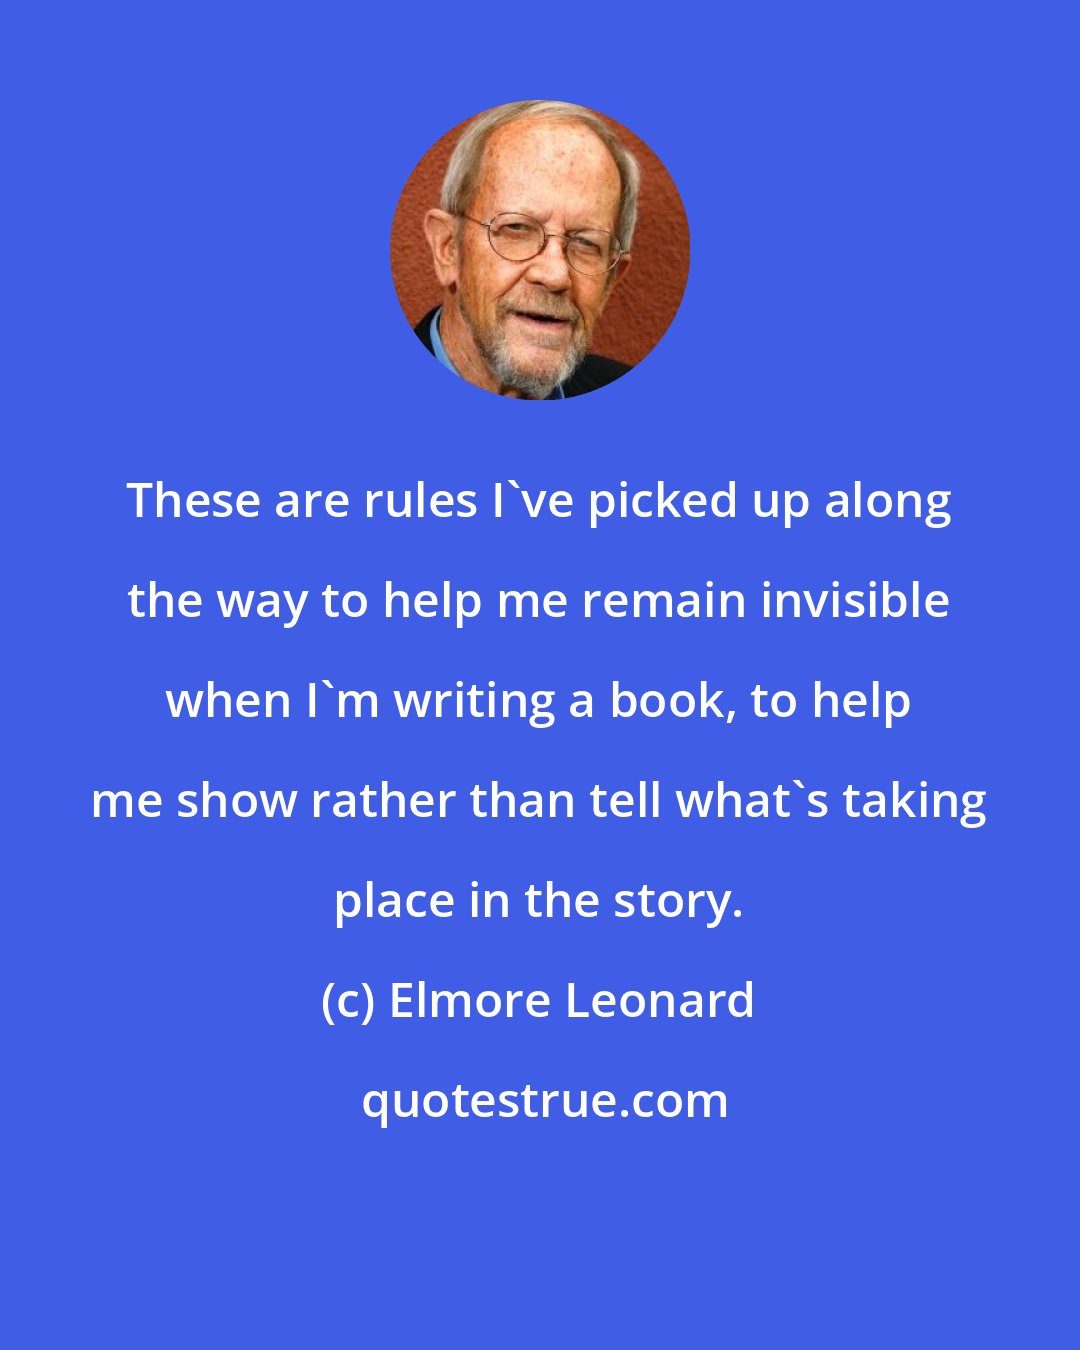 Elmore Leonard: These are rules I've picked up along the way to help me remain invisible when I'm writing a book, to help me show rather than tell what's taking place in the story.